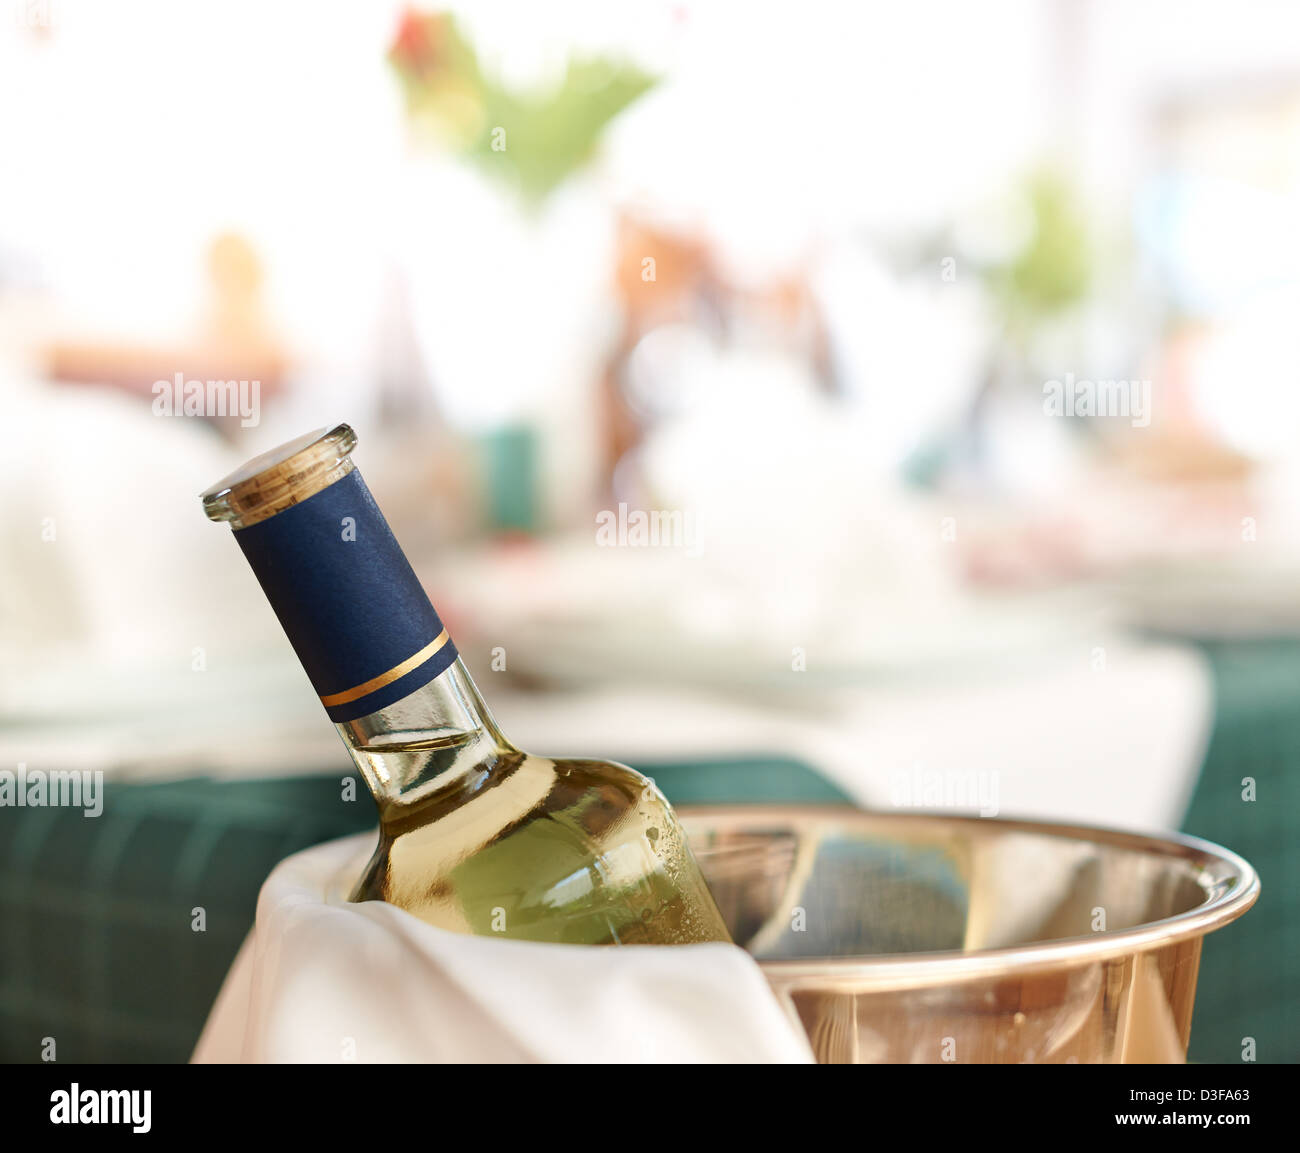 Bottle of cold white wine in ice on restaurant table Stock Photo